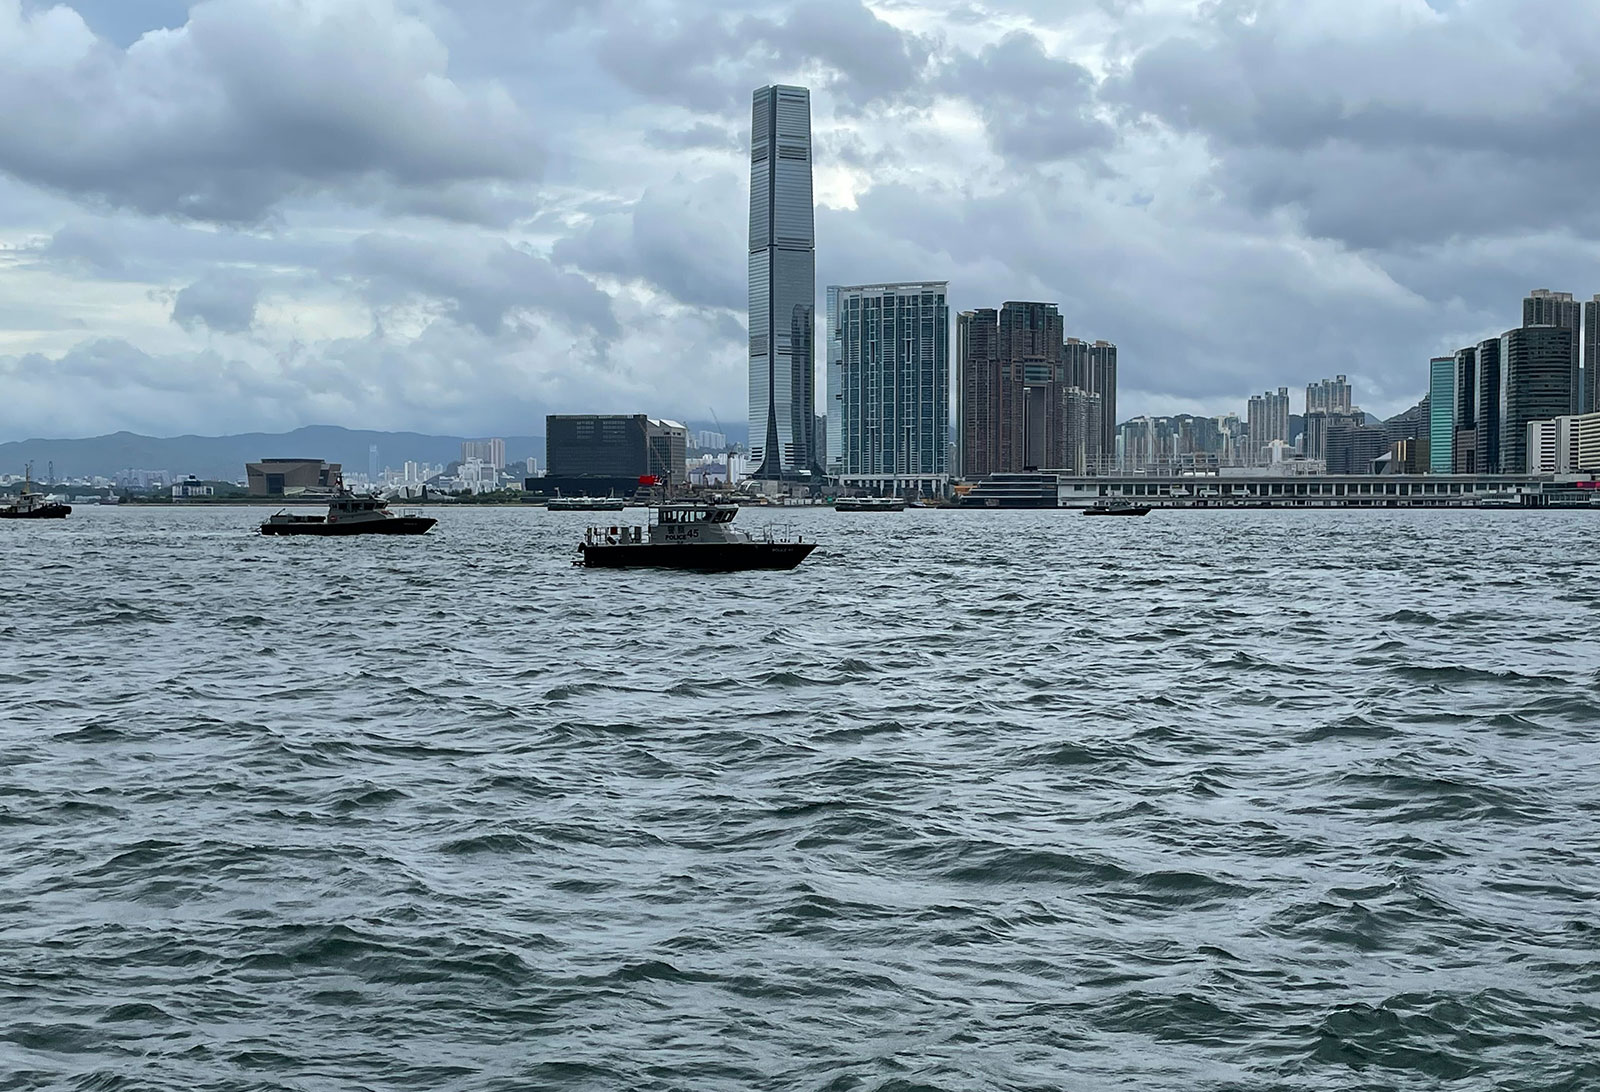 Police vessels patrol Hong Kong’s Victoria Harbor ahead of the flag raising ceremony on July 1.